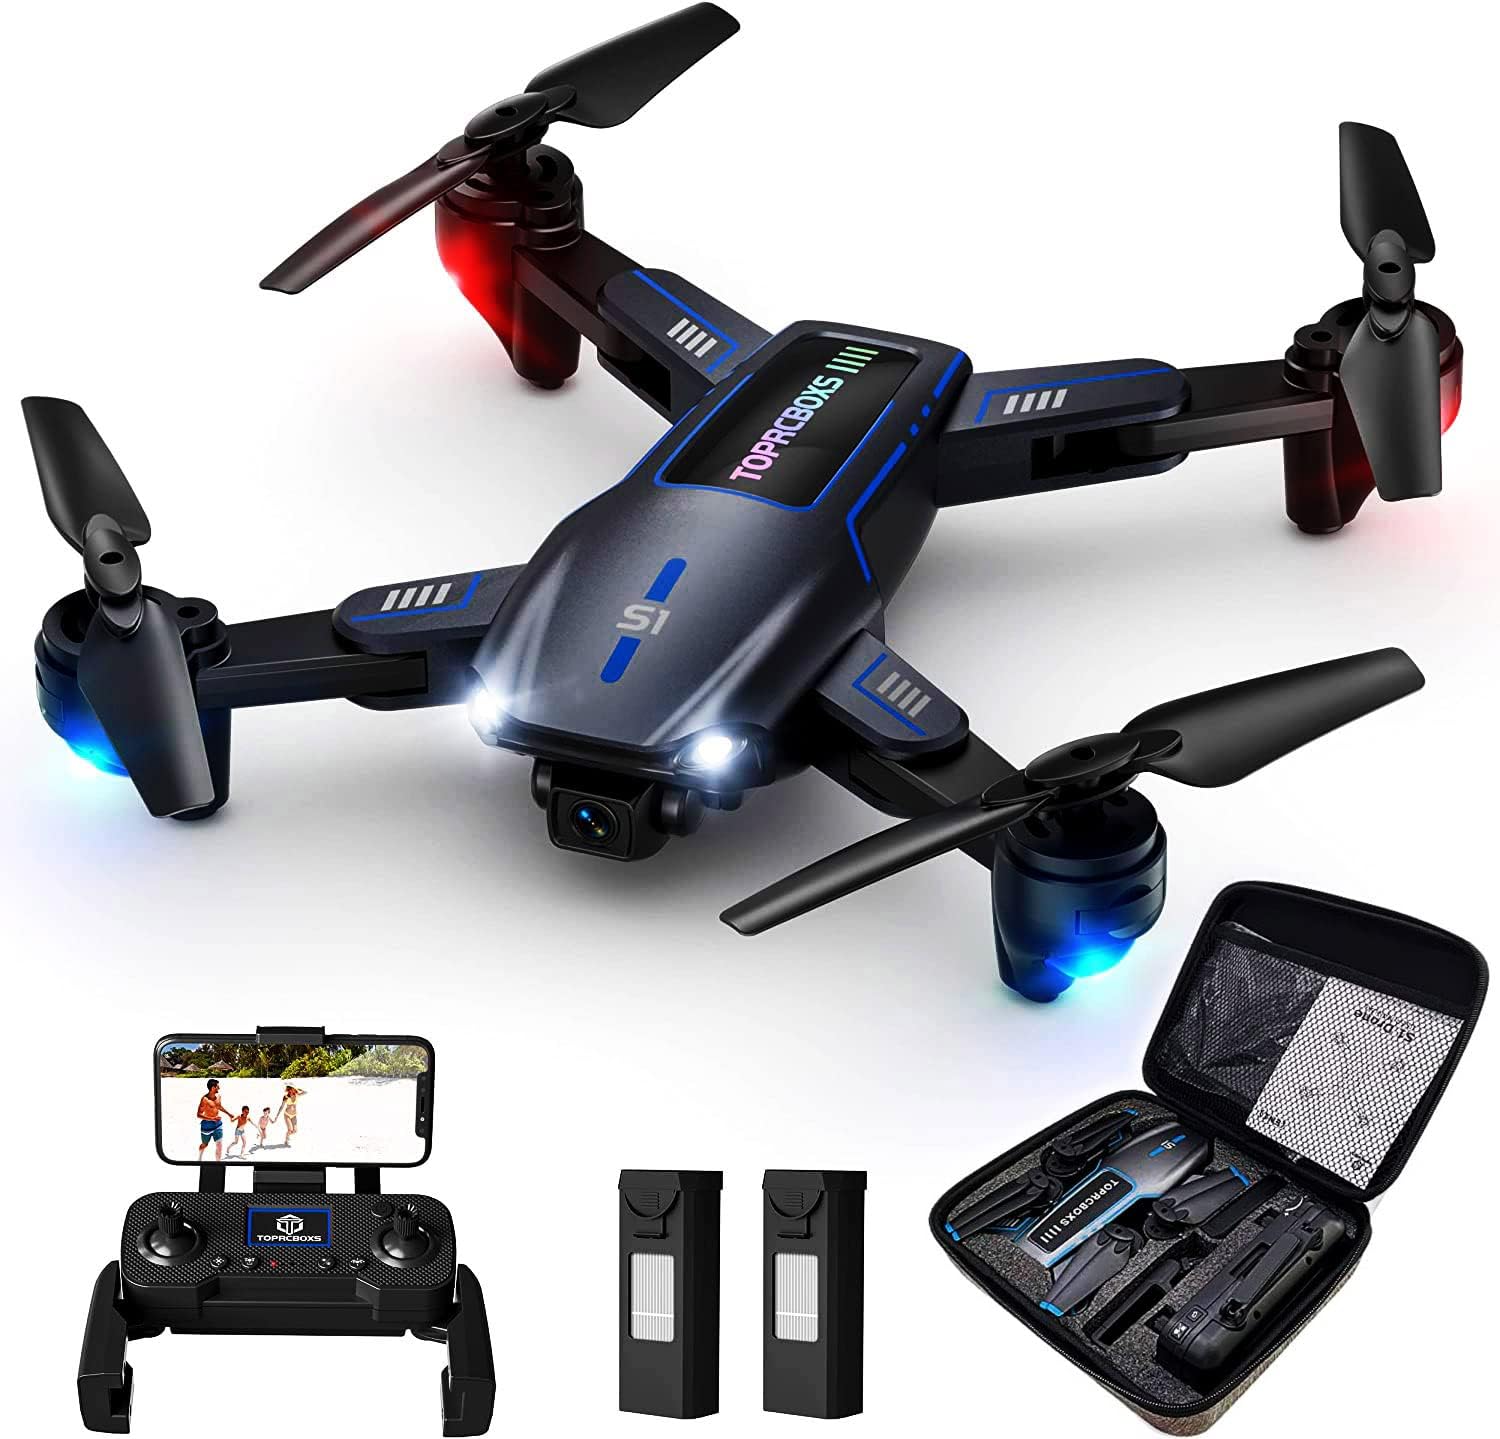 TOPRCBOXS S1 Drone Review: Explore the Exciting World of Aerial ...